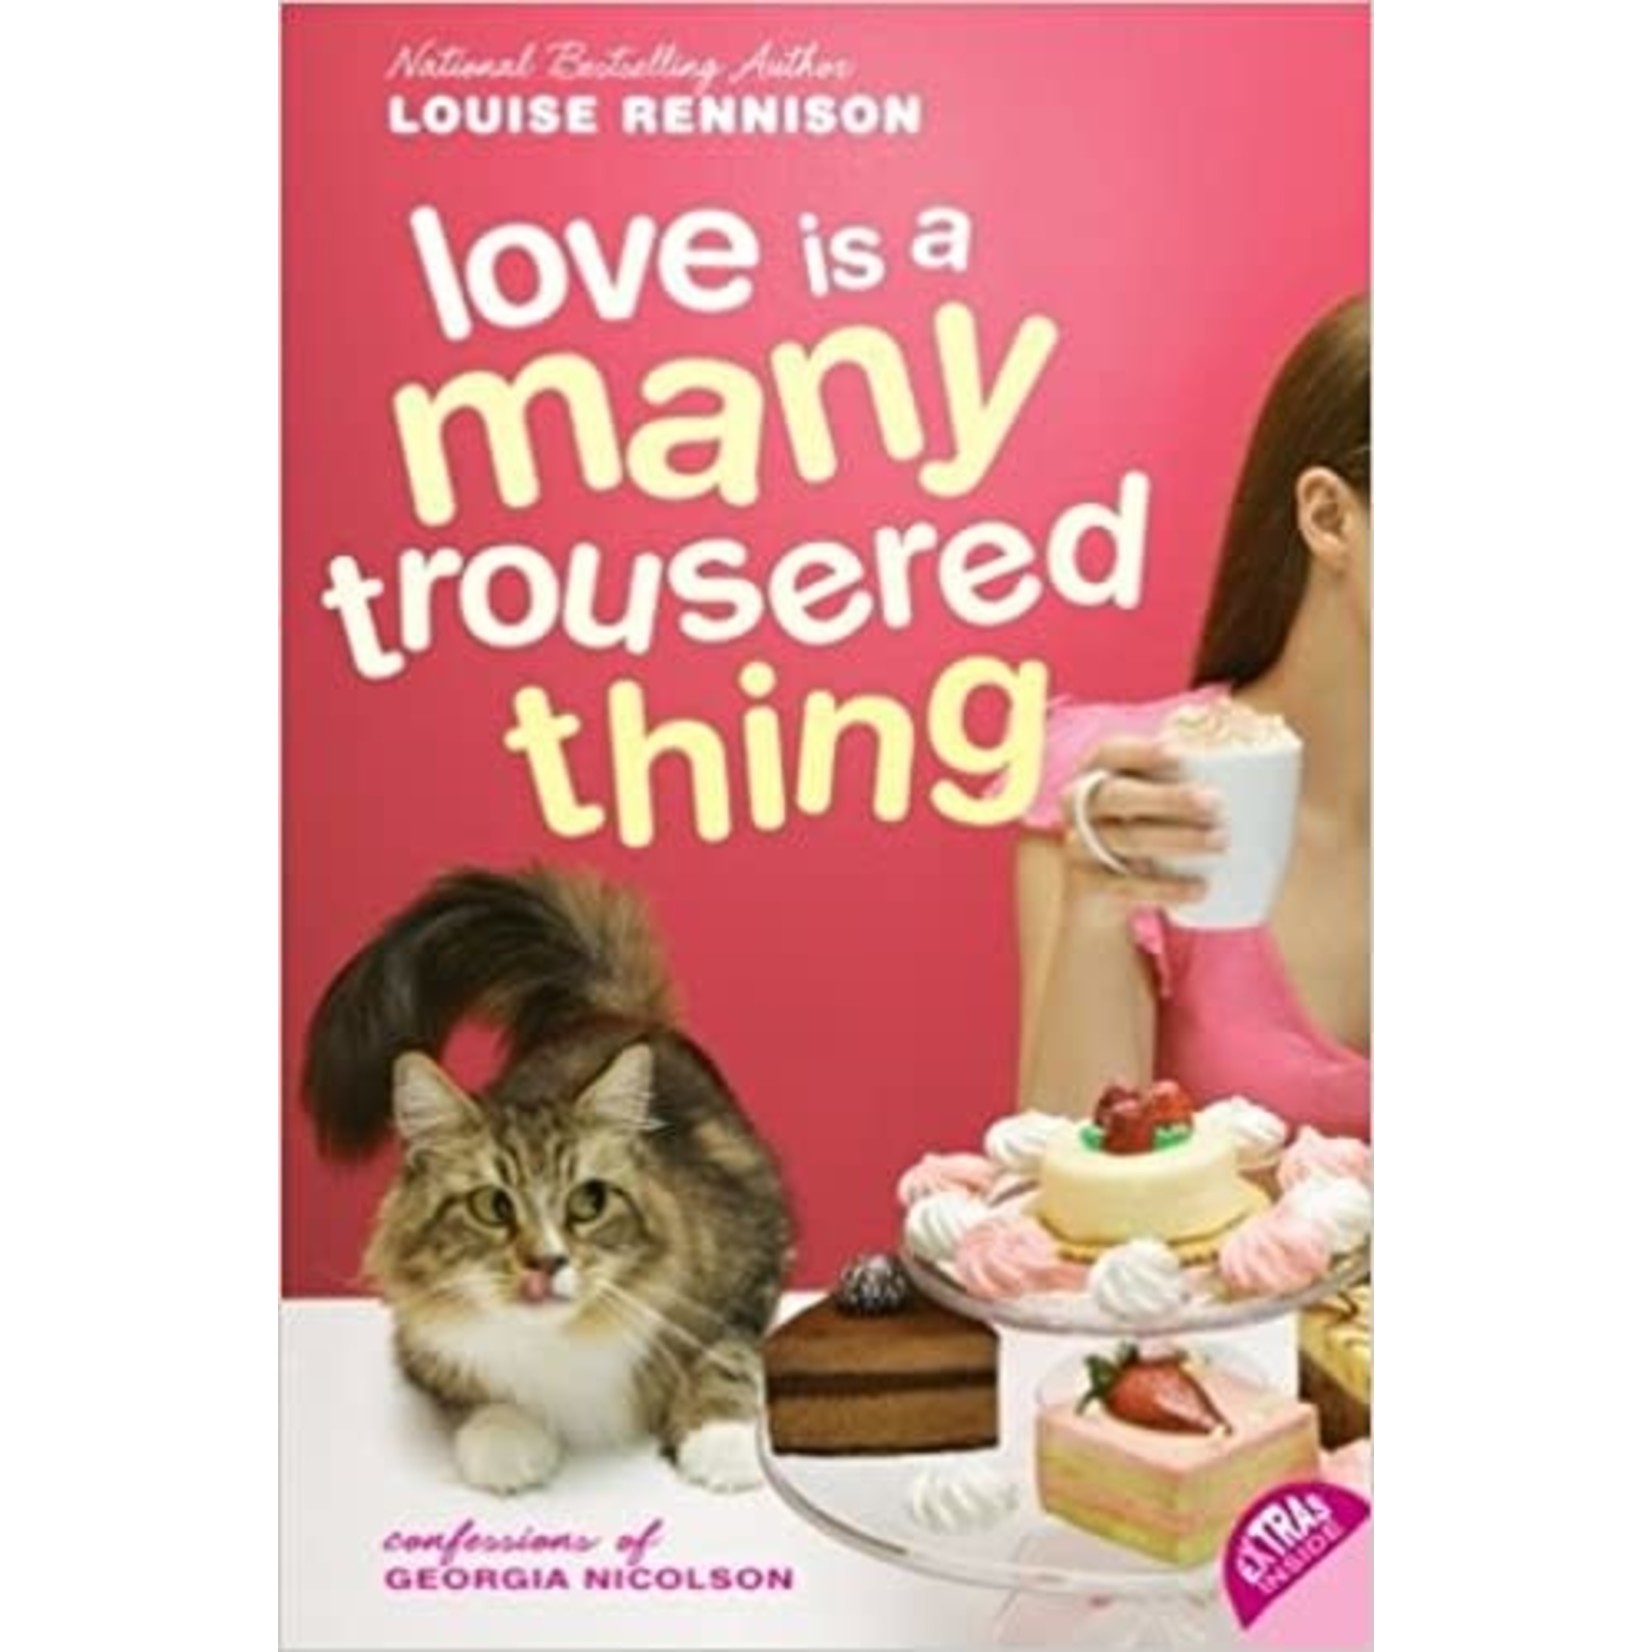 Louise Rennison Confessions of Georgia Nicolson Love is a Many Trousered Thing